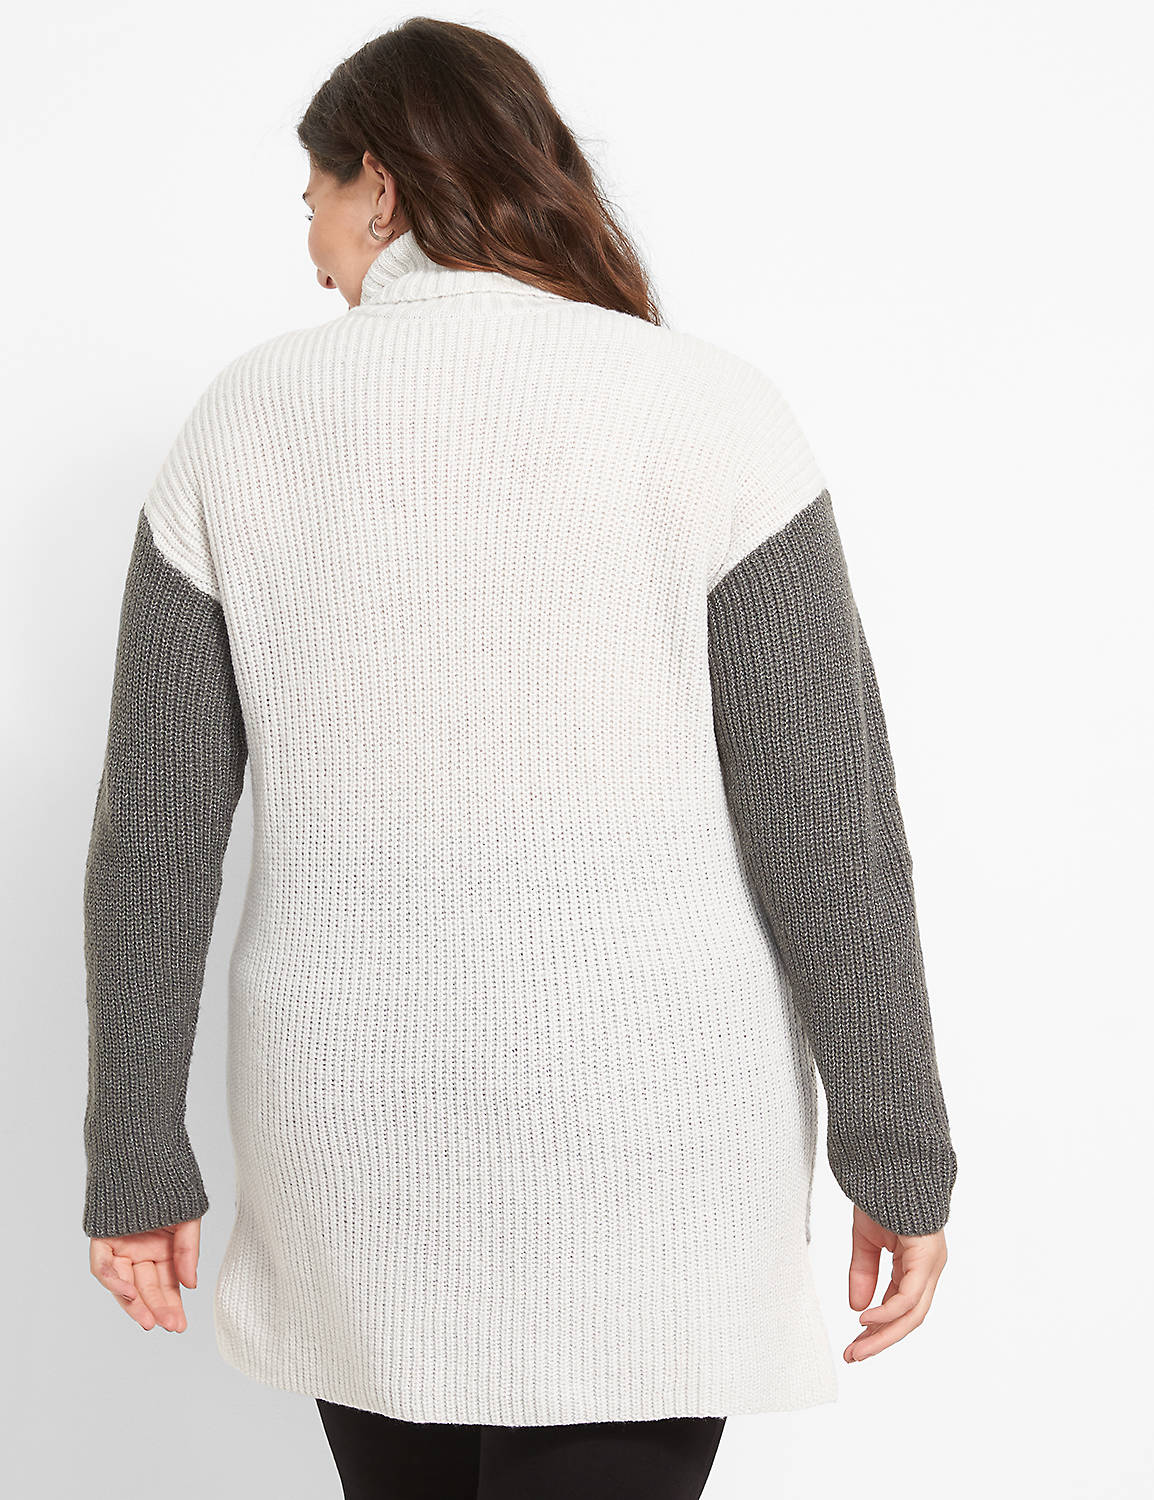 Long Sleeve Turtleneck Colorblock Pullover 1124657:BC04 Heather grey:10/12 Product Image 2